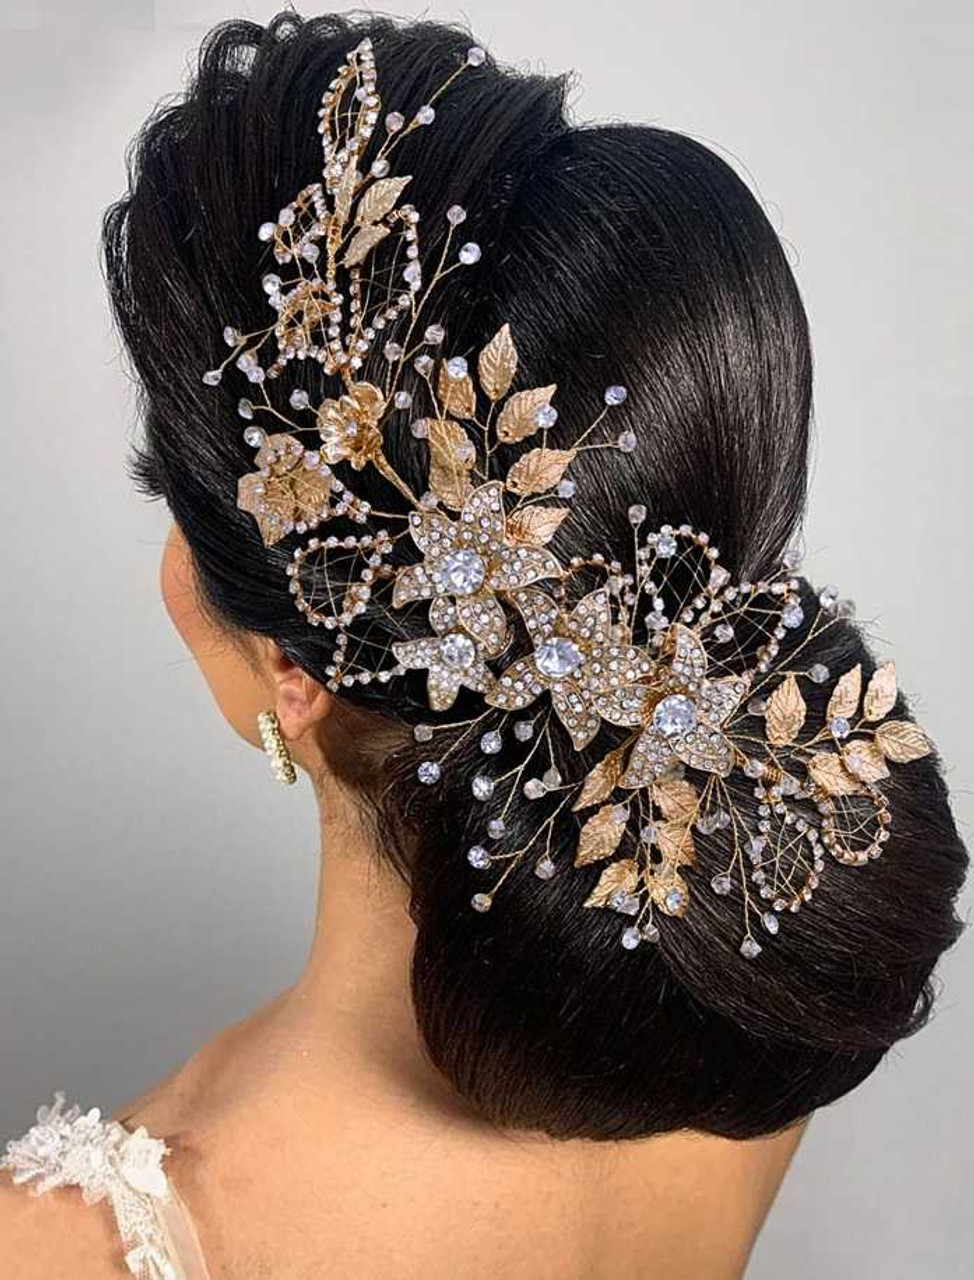 https://cdn11.bigcommerce.com/s-zb3qt33o/images/stencil/1280x1280/products/19435/58688/Large-Floral-Gold-Plated-Crystal-Wedding-Headpiece_50961__54583.1688664460.jpg?c=2